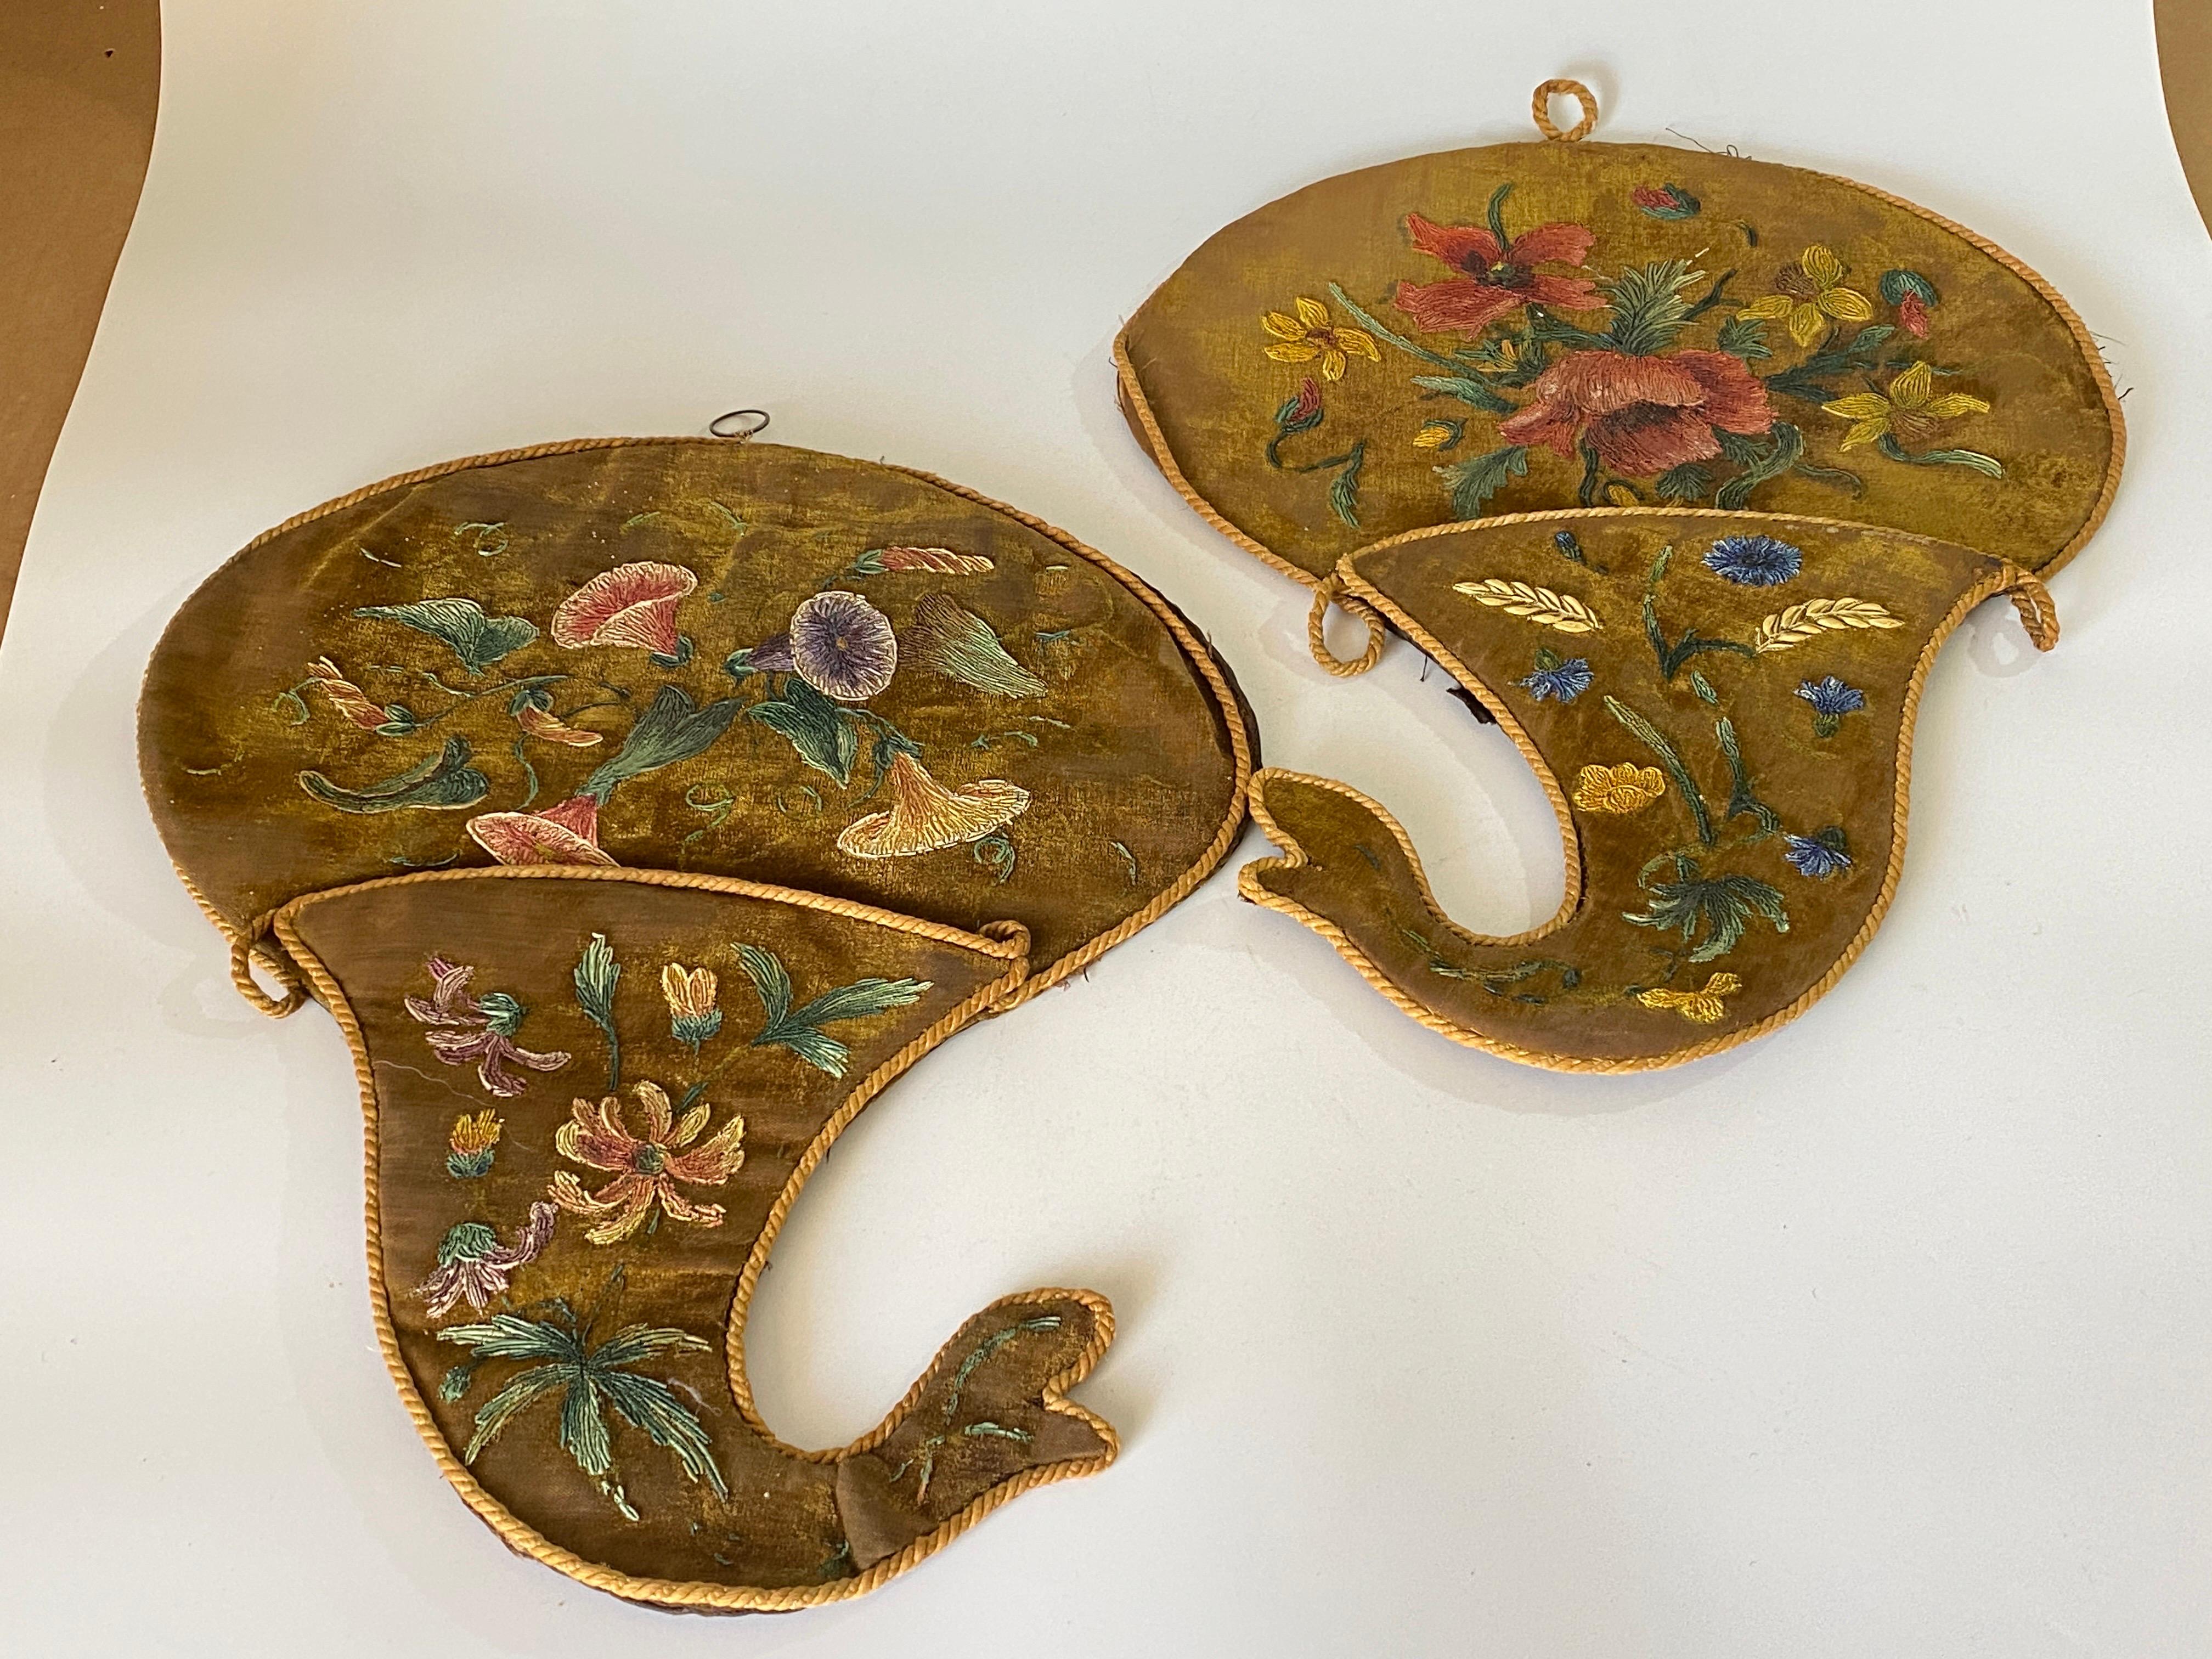 Wall Letter Holder in Embroidery on Fabric, with Floral Decorations 19th Century For Sale 7